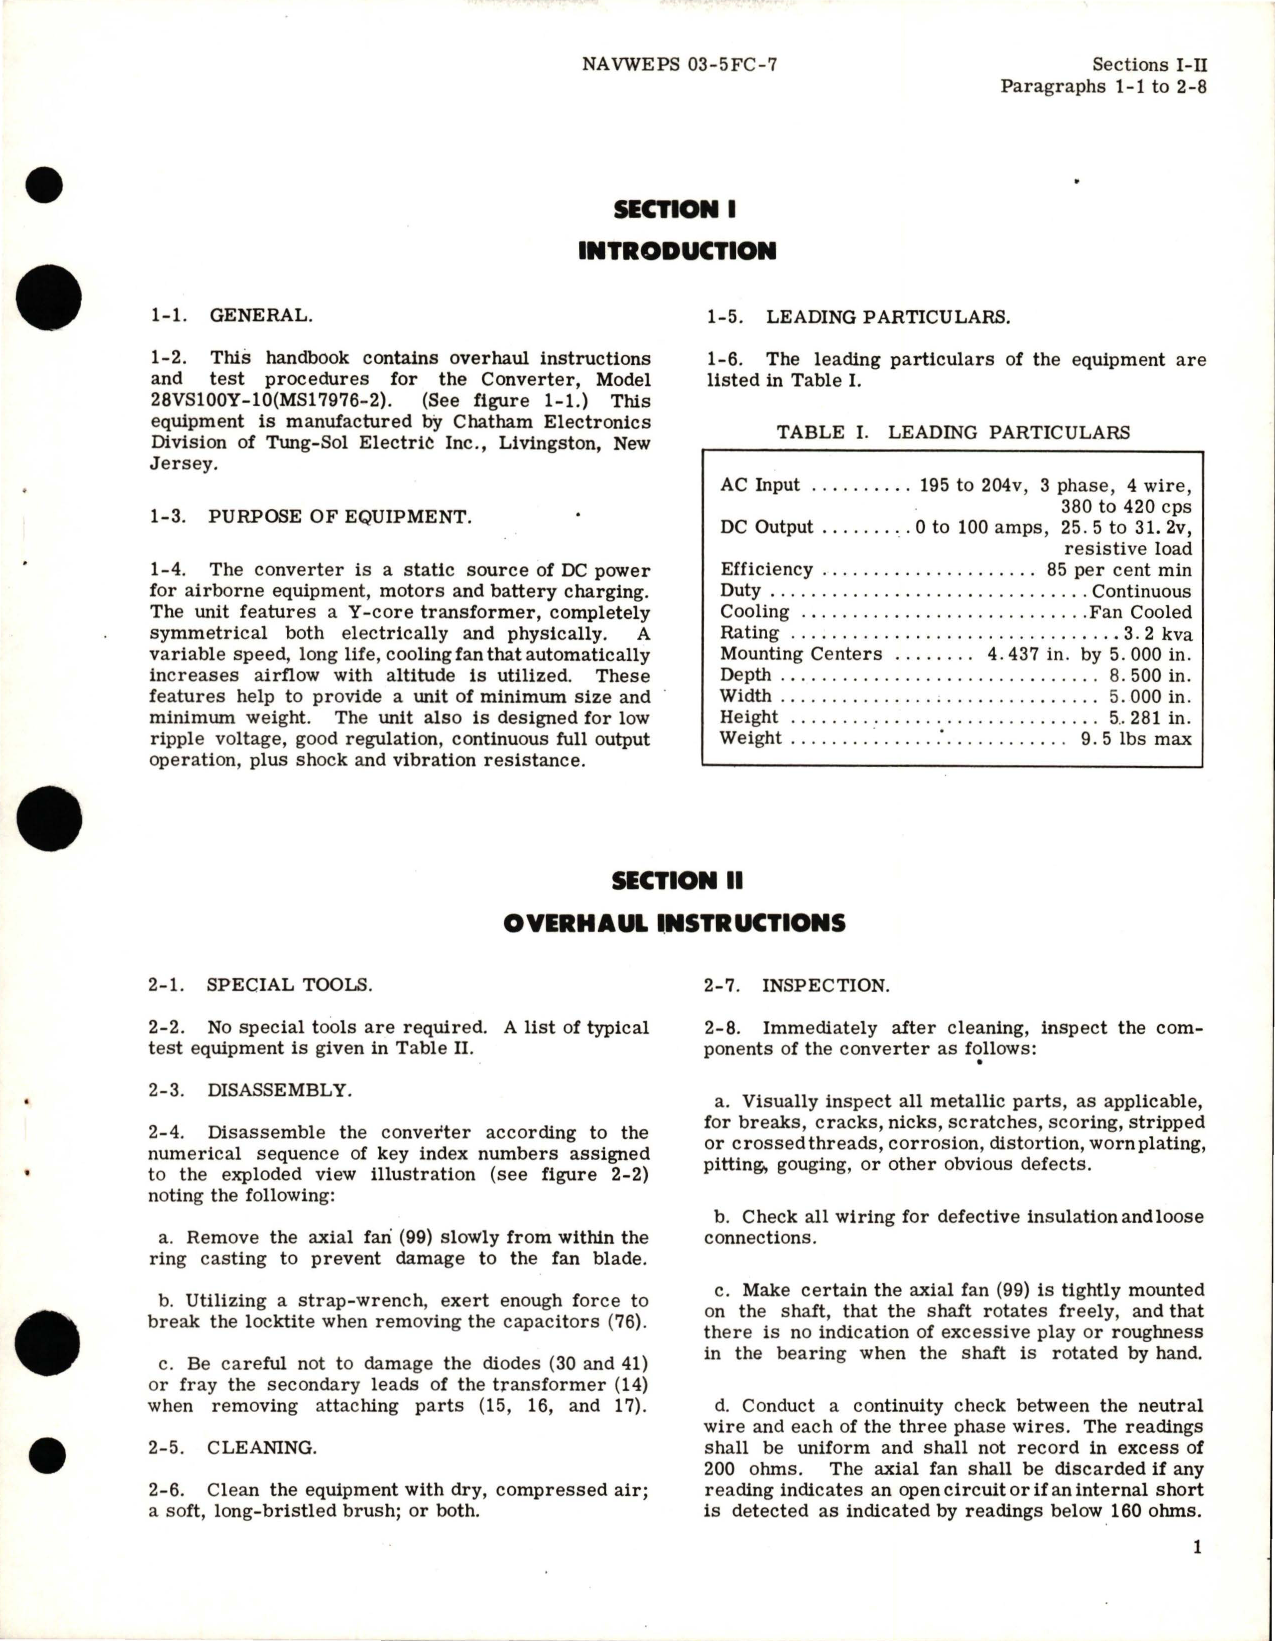 Sample page 5 from AirCorps Library document: Overhaul Instructions for Class C 100 Amp Converter - Part 28VS100Y-10 - Type MS17976-2